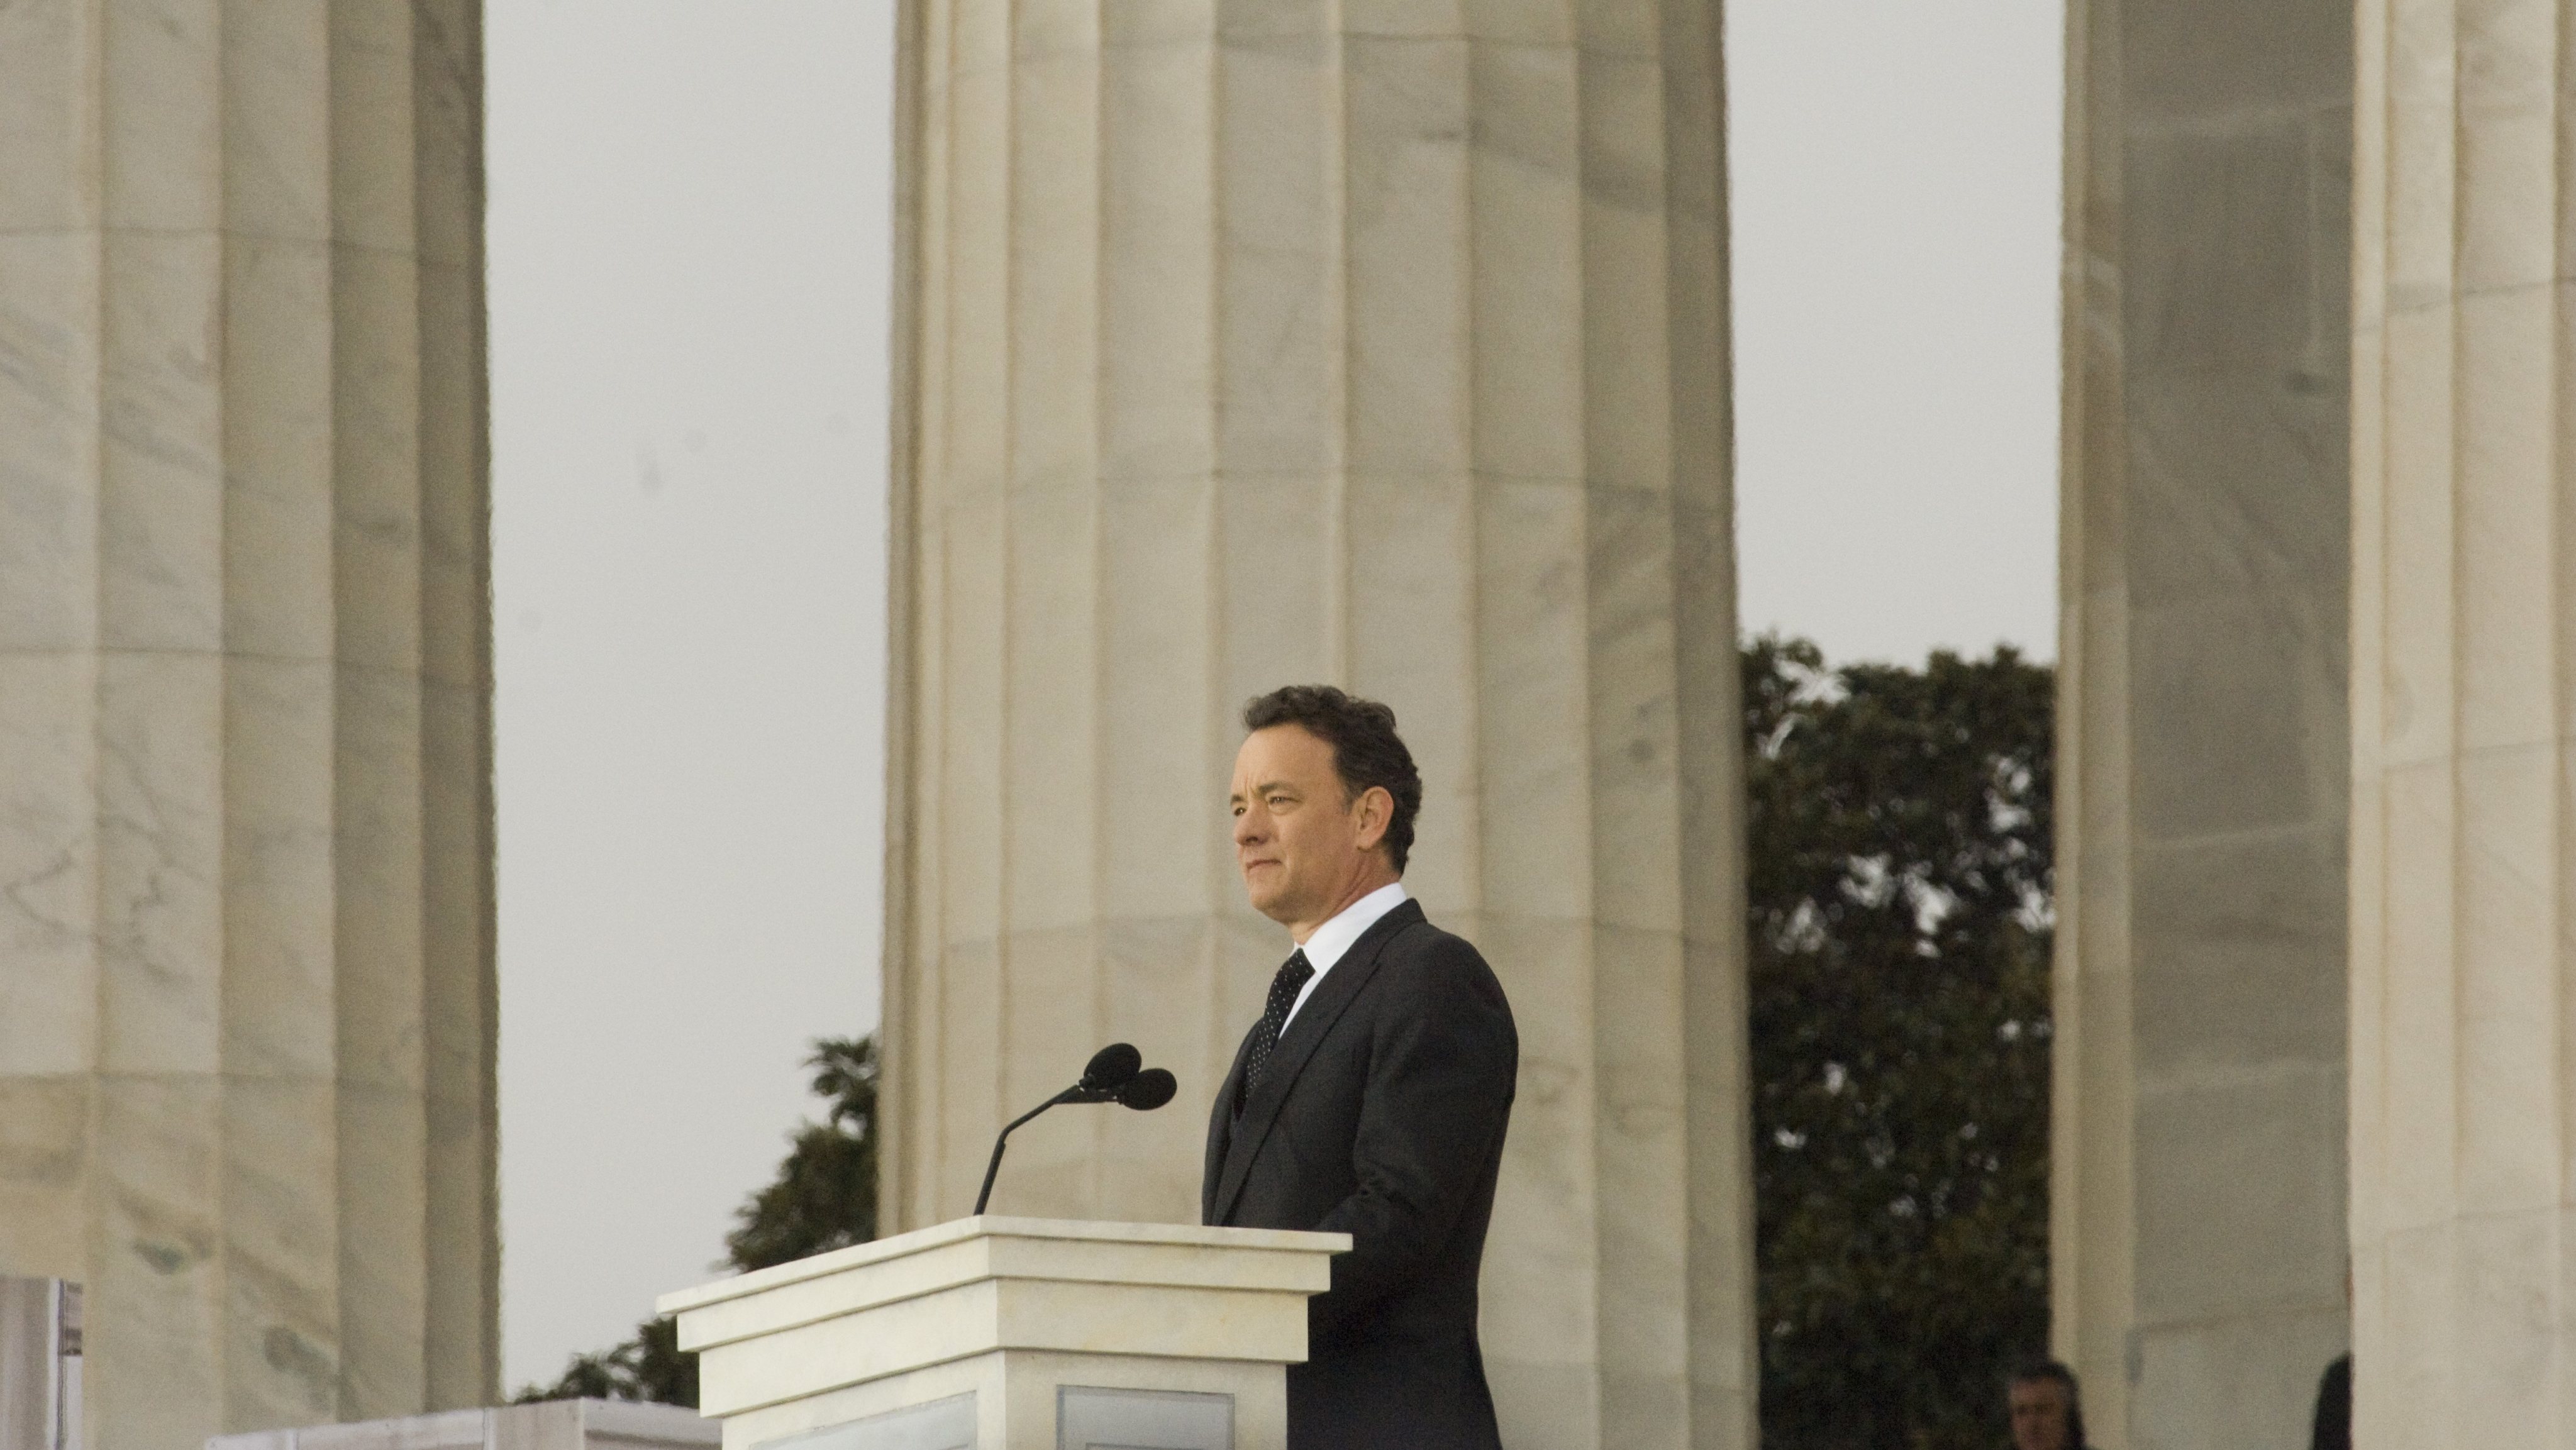 We Are One: Opening Inaugural Celebration at the Lincoln Memorial